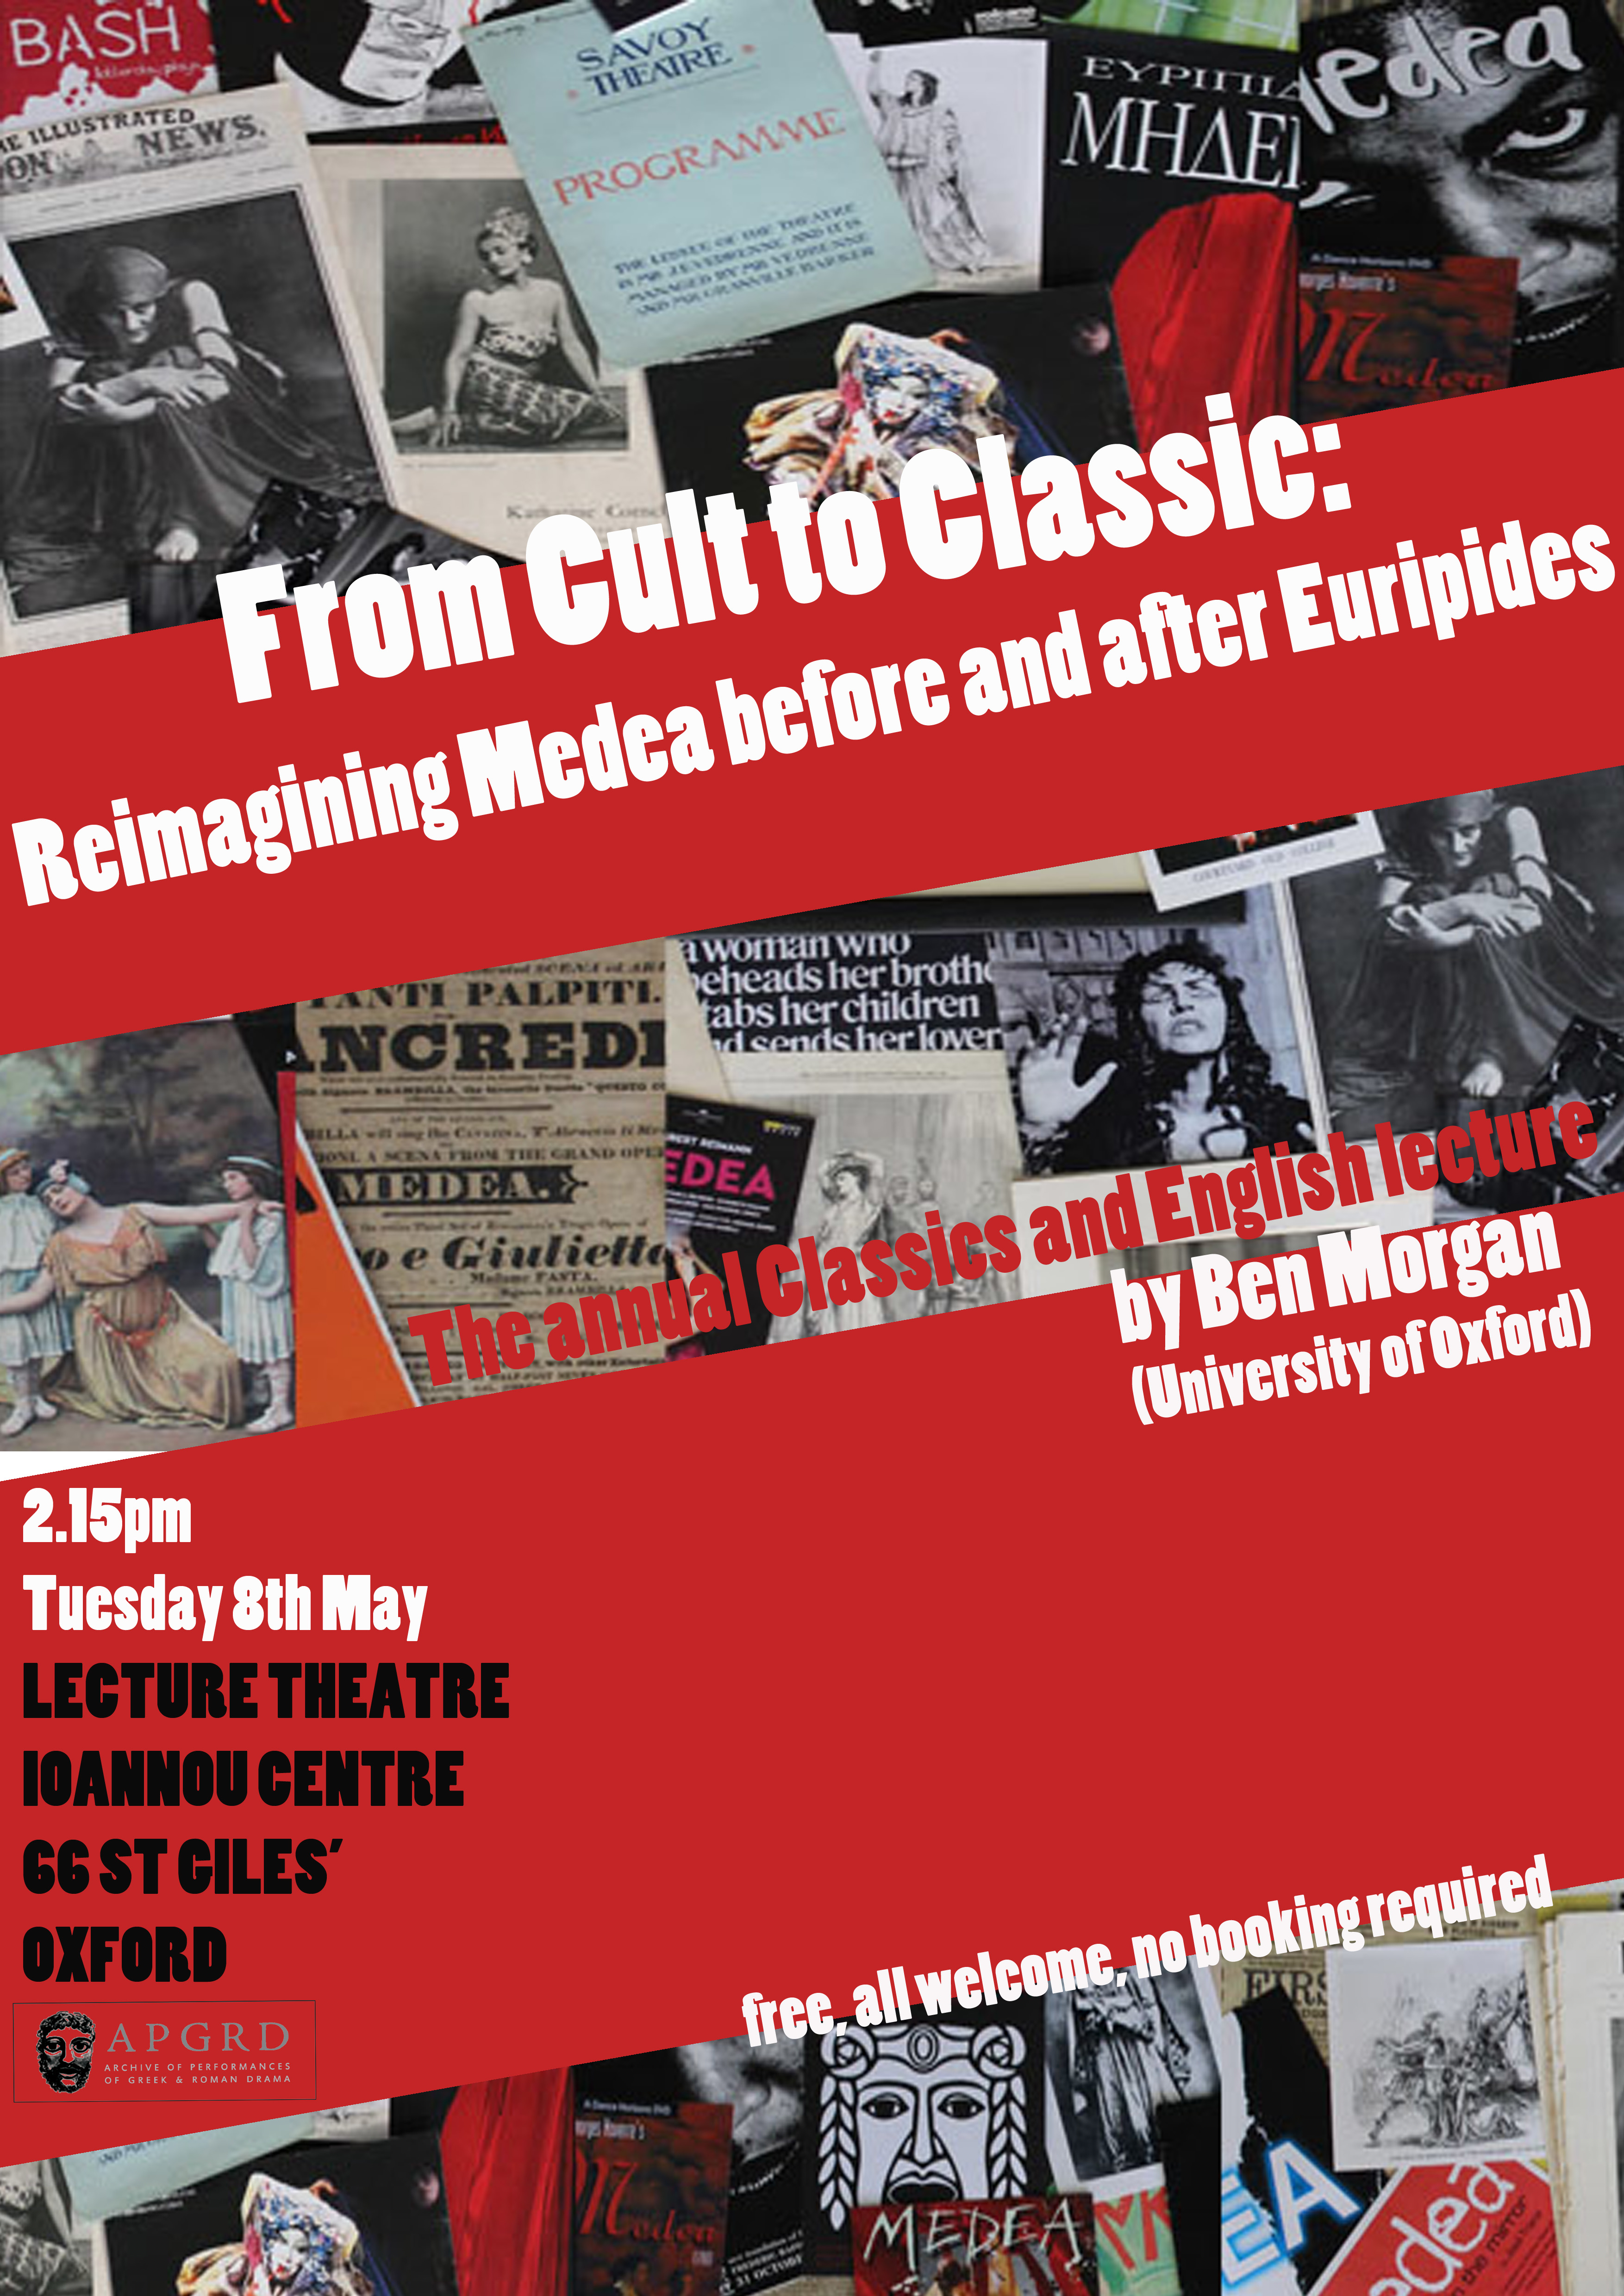 from cult to classic reimagining medea before and after euripides 8 may poster